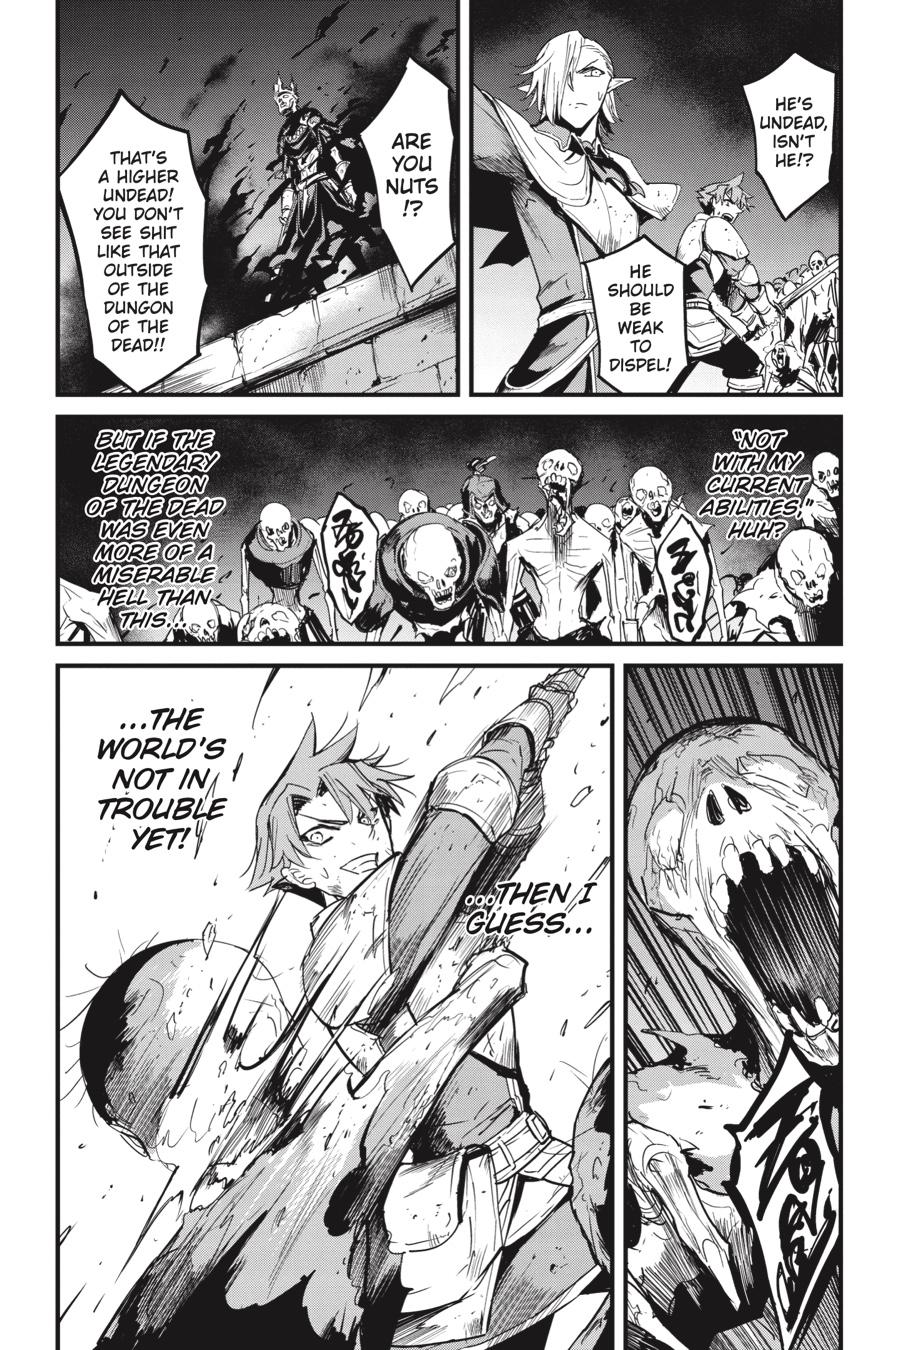 Goblin Slayer: Side Story Year One chapter 74